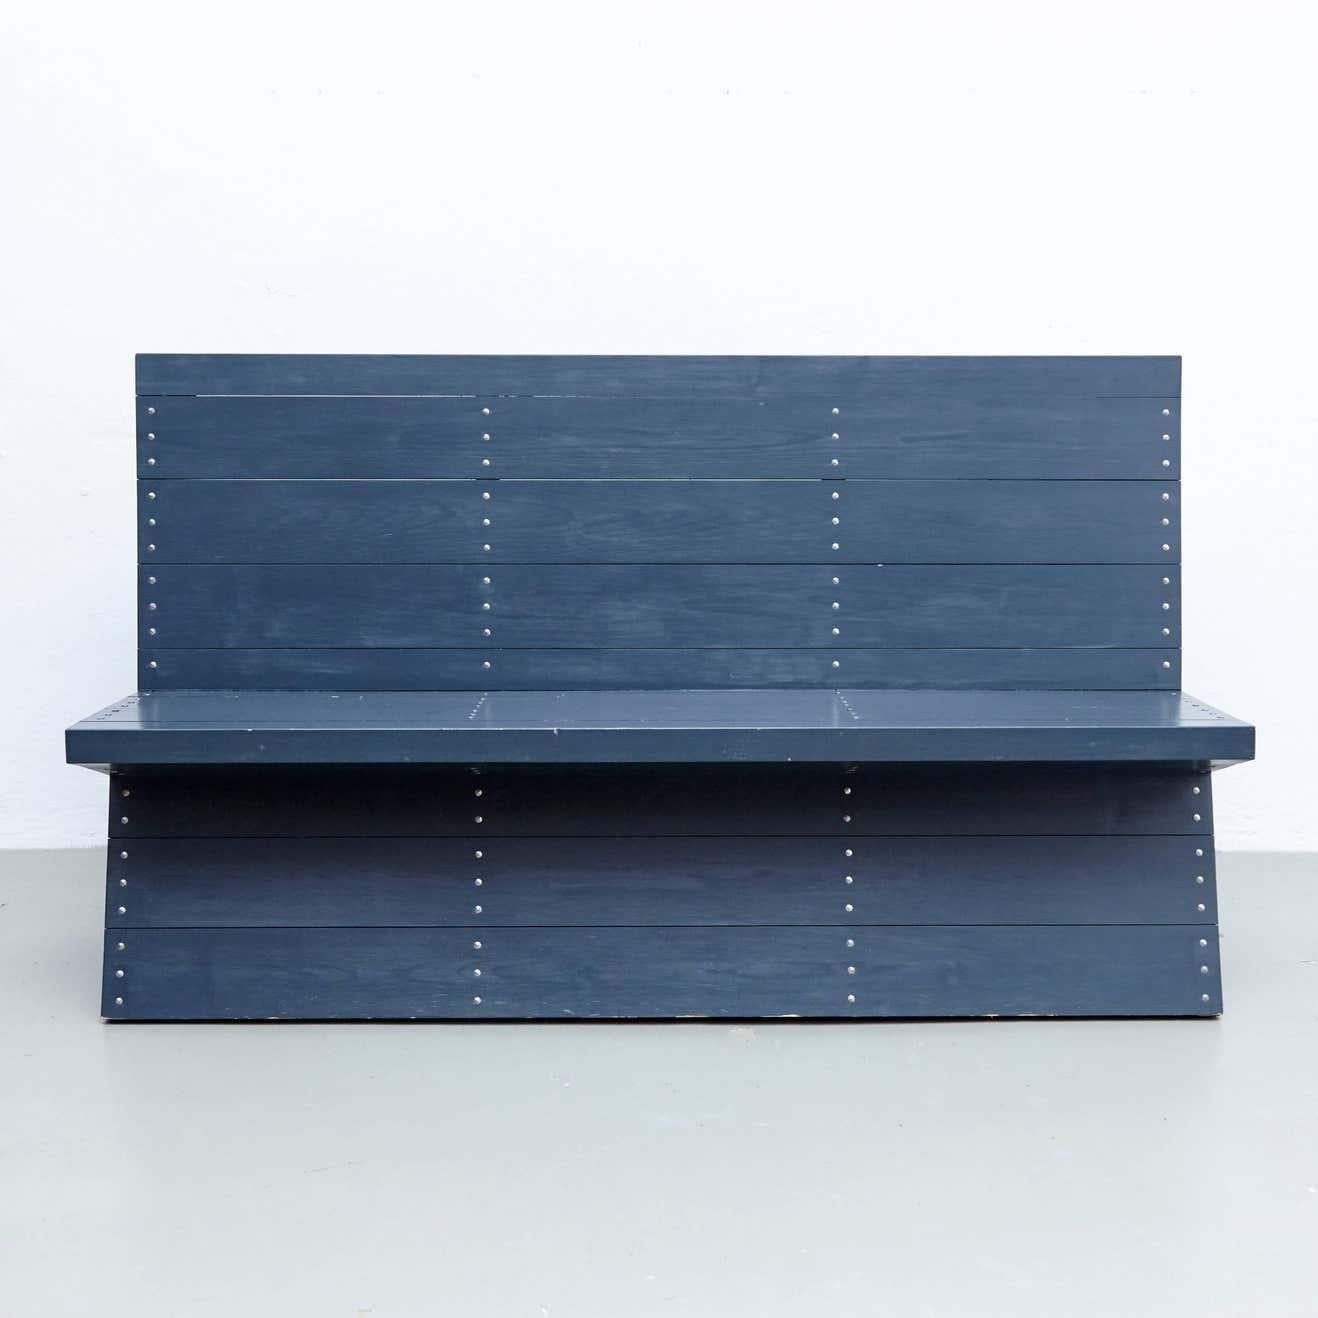 Bench designed by Dom Hans van der Laan in the Netherlands.
Manufactured in The Netherlands, circa 1980.

Lacquered wood seat and backrest with nails.

In good original condition, with minor wear consistent with age and use, preserving a